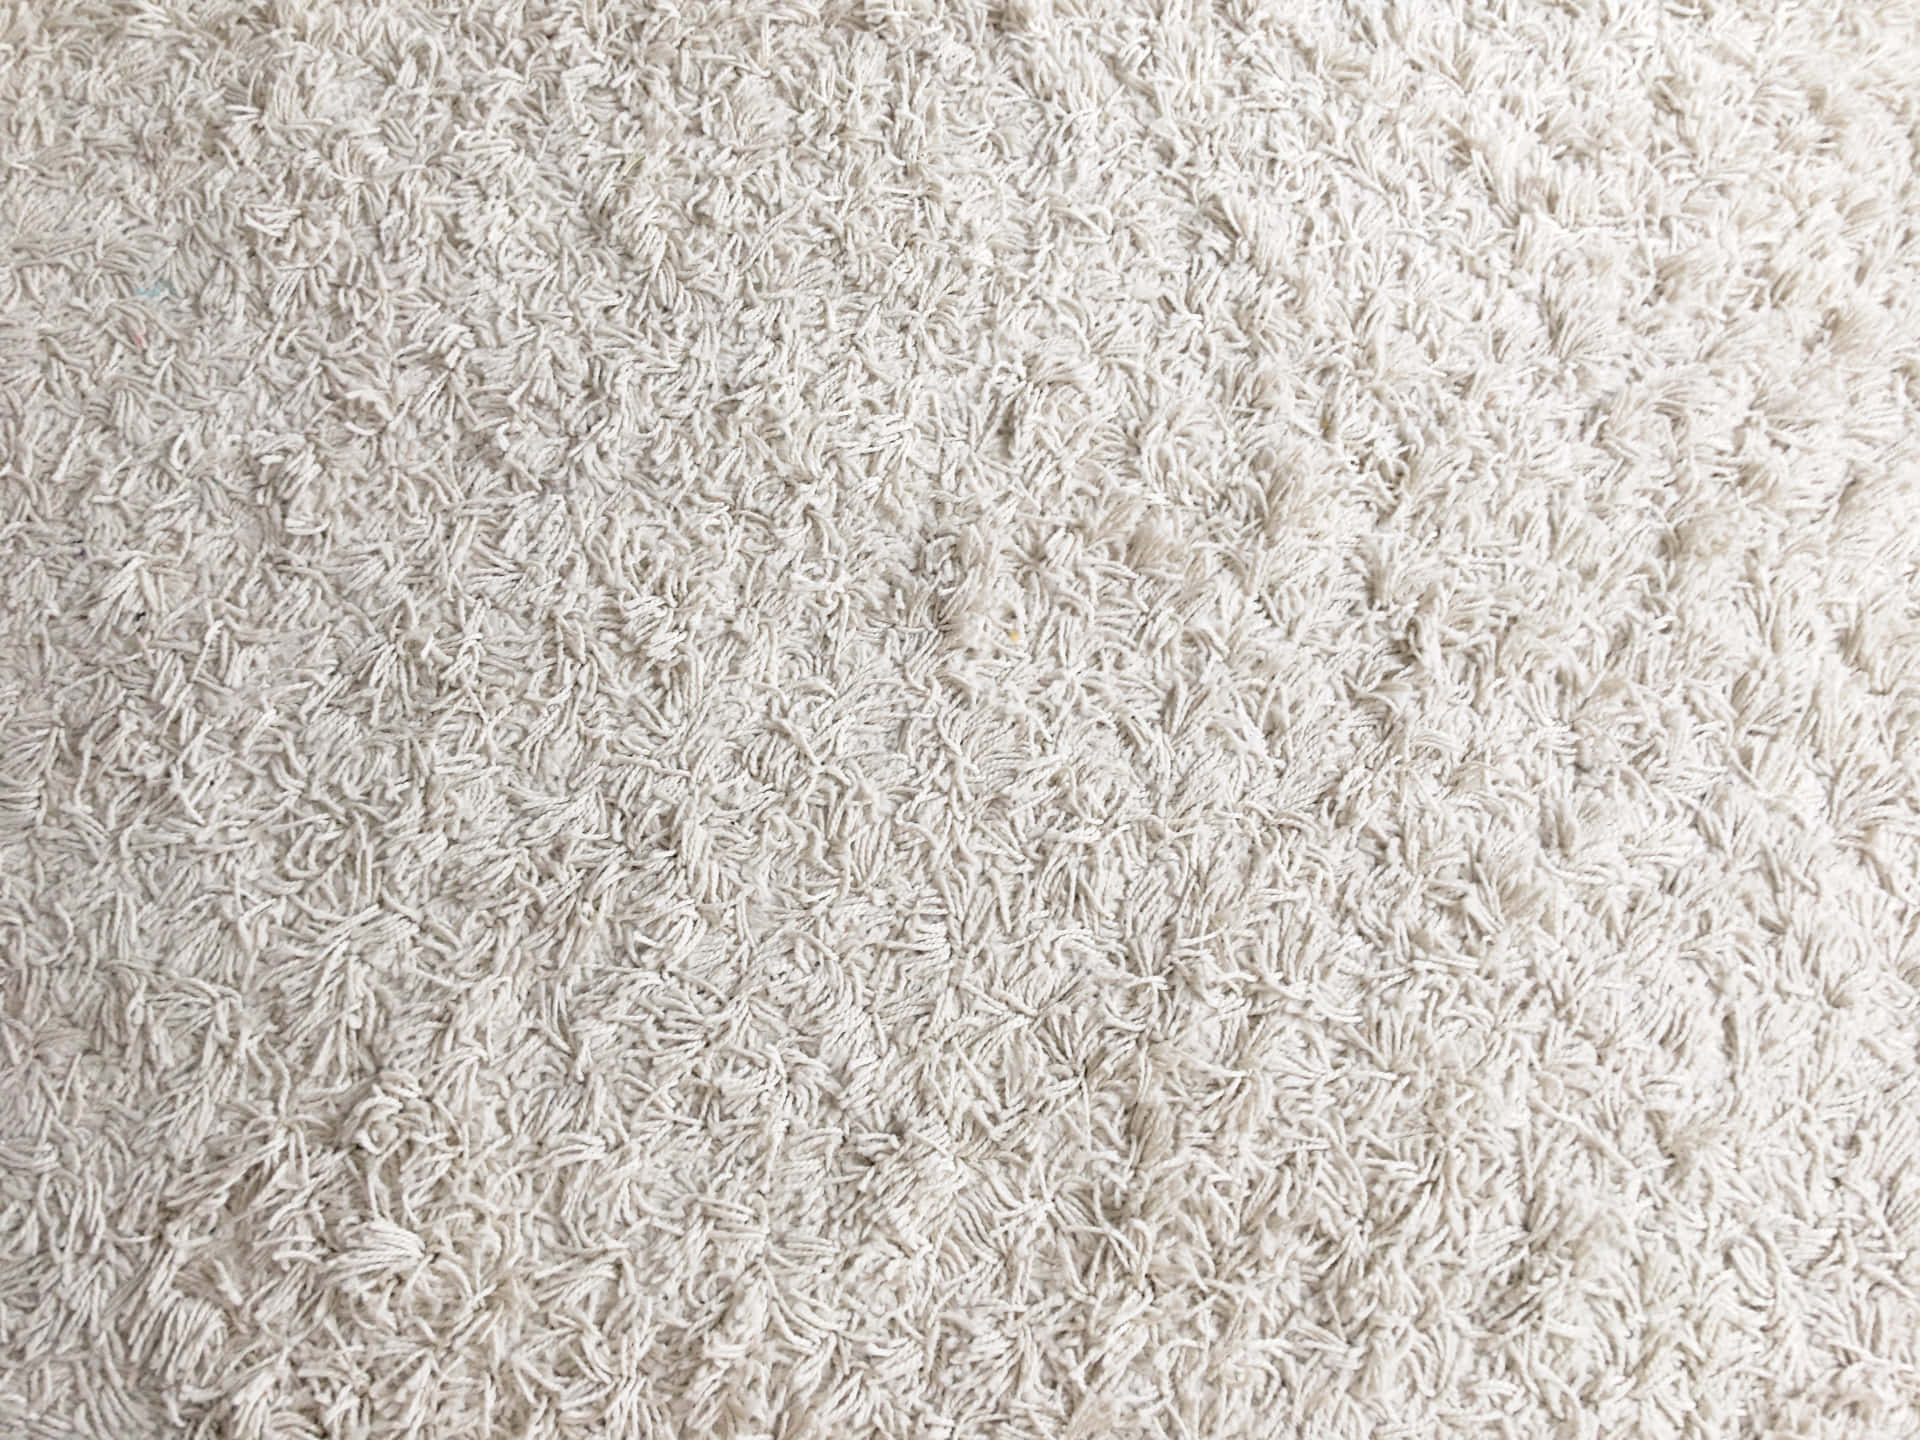 - Textured Carpet adds Comfort and Quality to Your Home